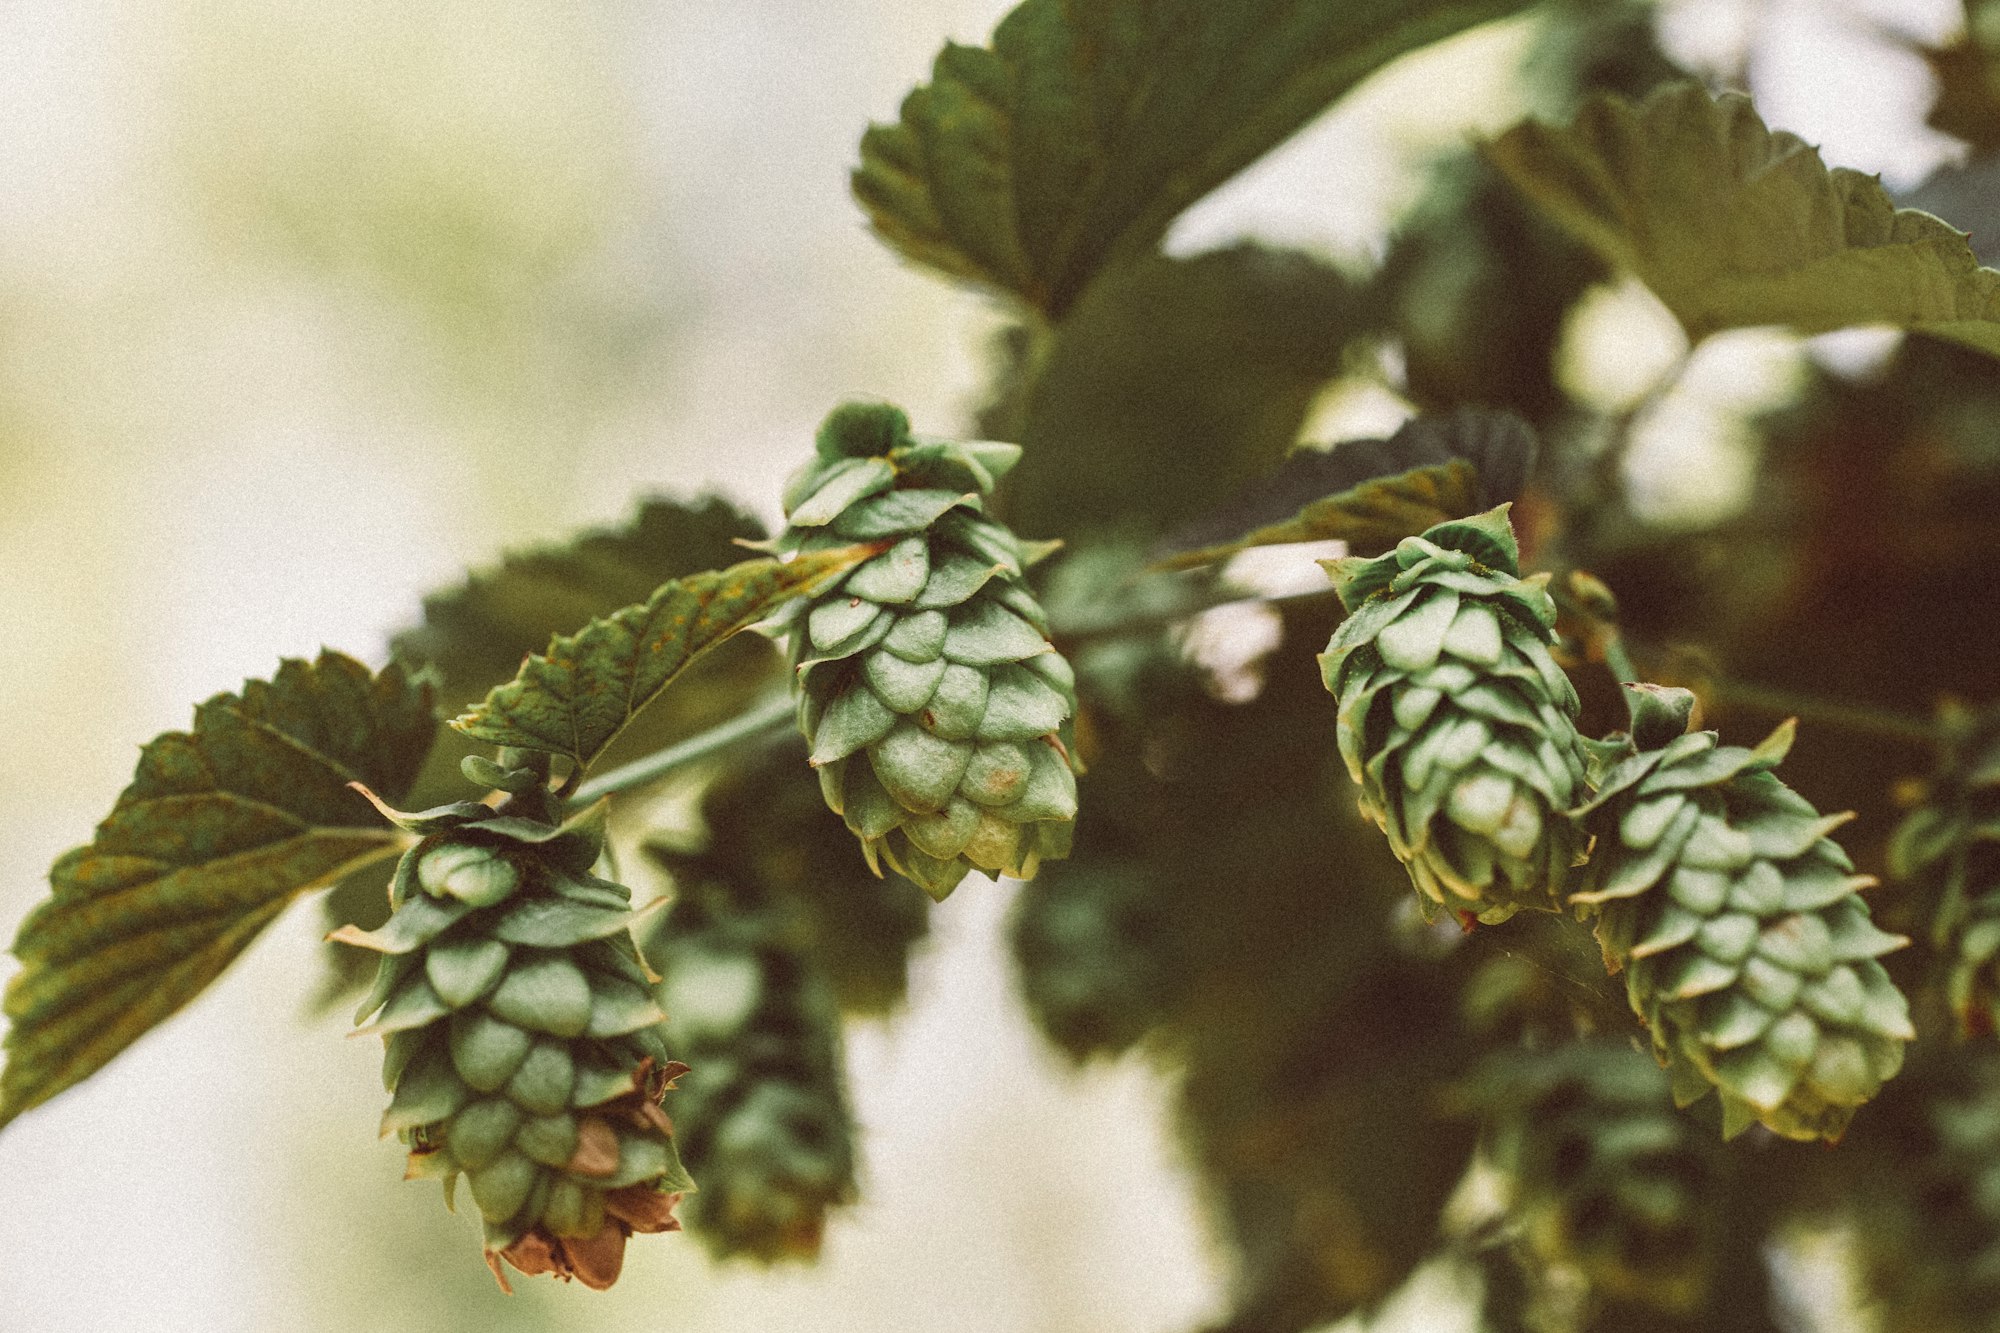 Organic bio hop for craftbeer, grown in Upper Franconia. Made with Canon 5d Mark III and loved analog lens, Leica APO Macro Elmarit-R 2.8 / 100mm (Year: 1993)